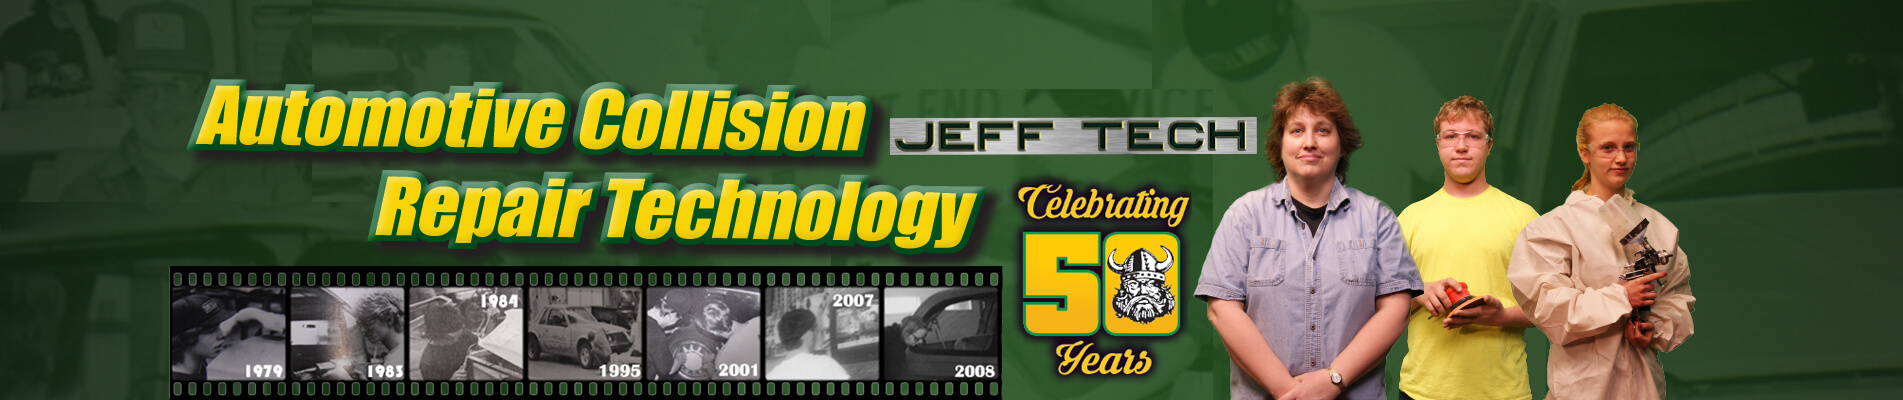 Jeff Tech Celebrating 50 Years. Automotive Collision Repair Technology. Learn more about our CTE Programs.